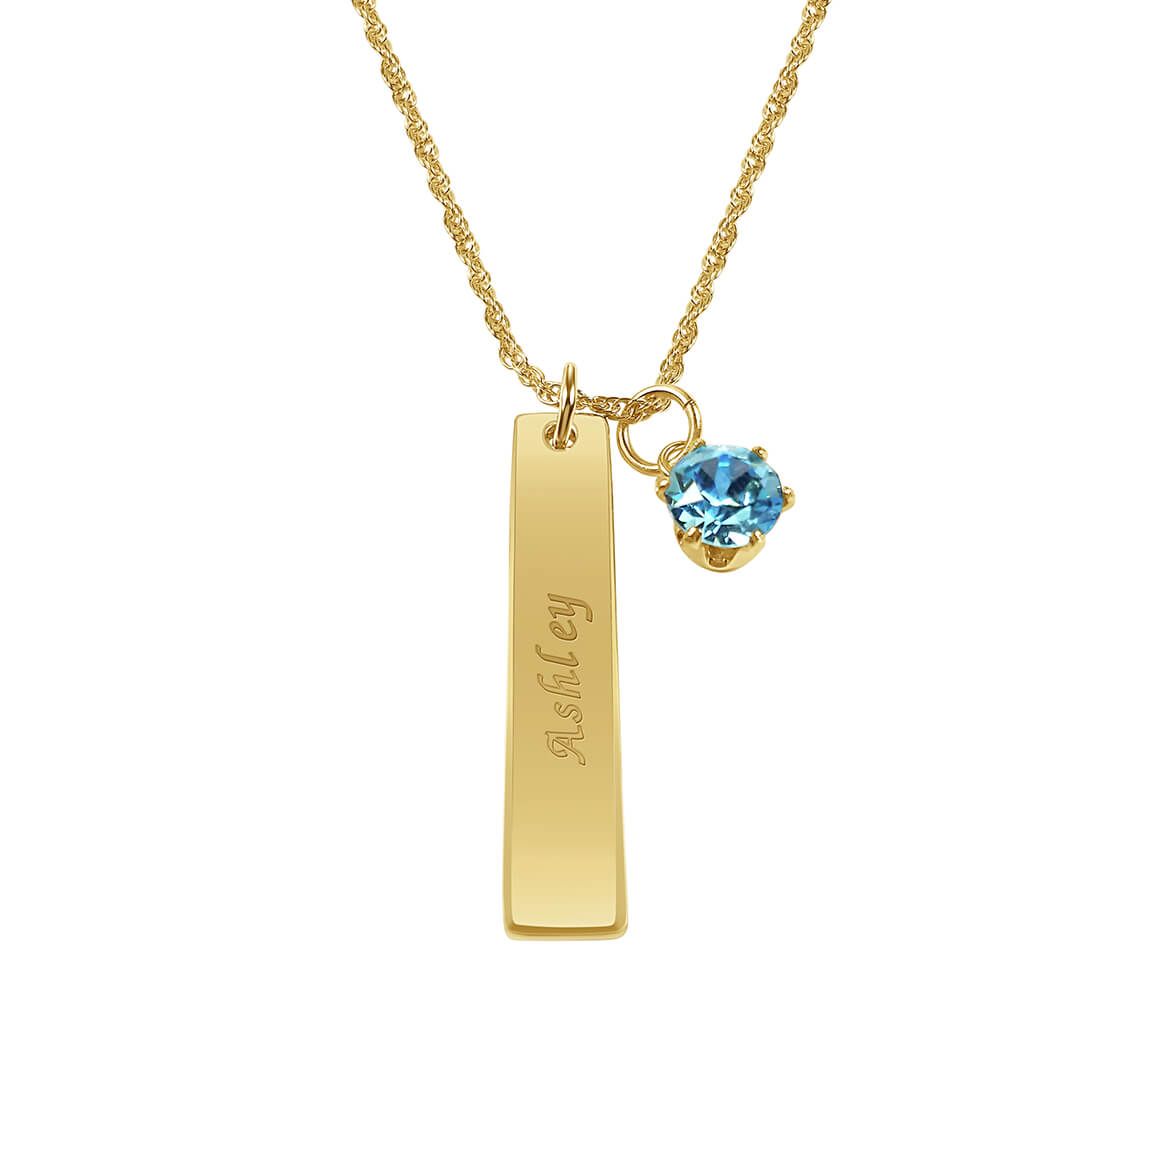 Personalized Ladies ID Pendant with Birthstone Charm + '-' + 366410